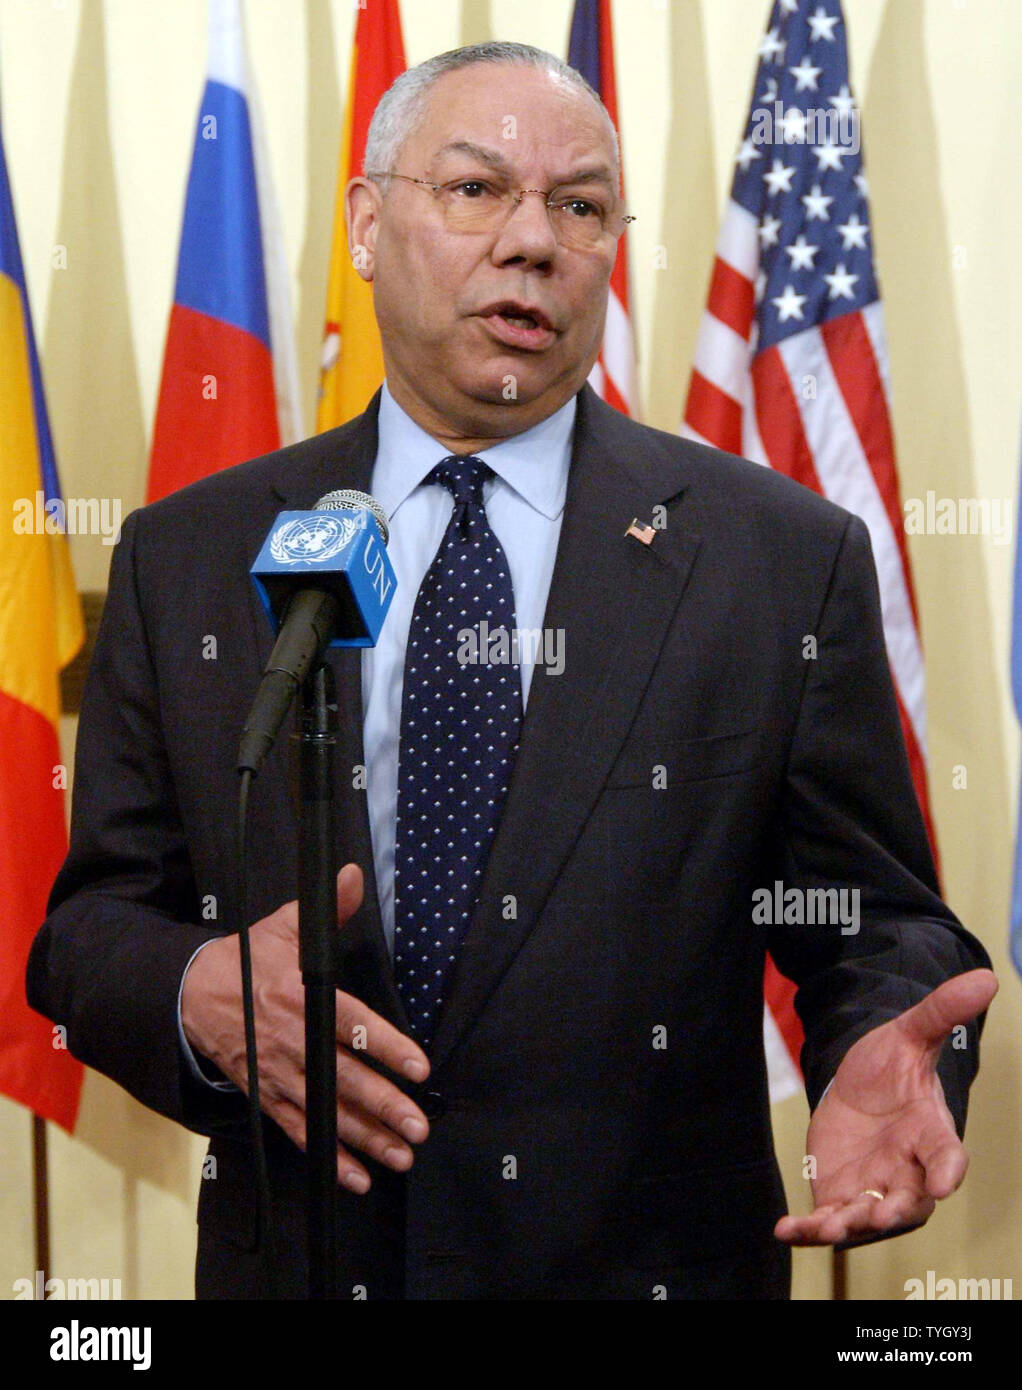 USA Secretary of State Colin Powell meets with United Nation media  on 12/31/04 to  announce that the USA has increased it's tsunami monetary emergency aid from $35 million to $350 million dollars. (UPI Photo/Ezio Petersen) Stock Photo